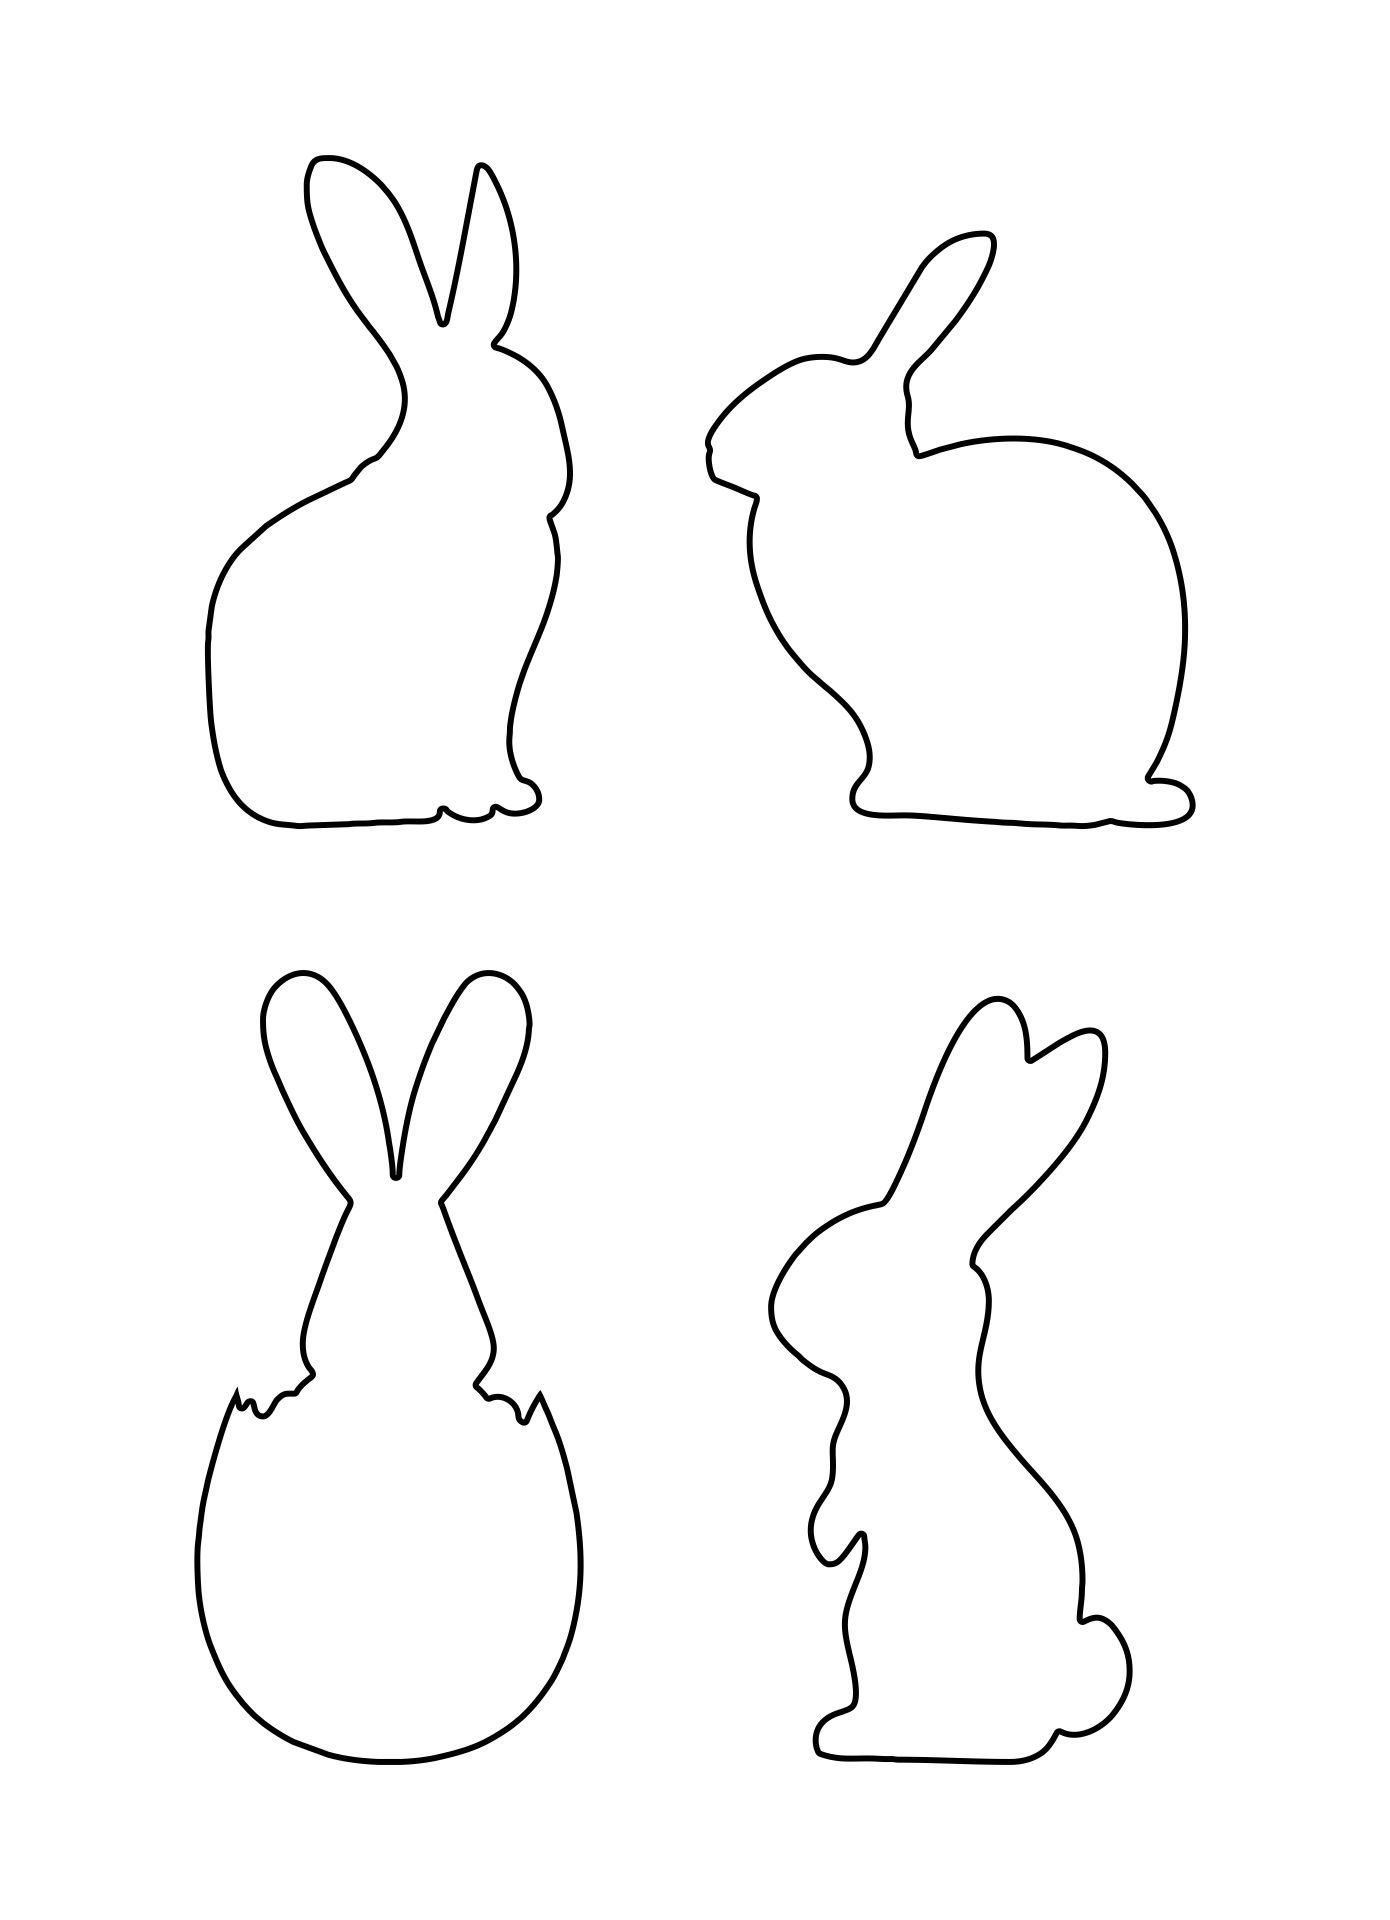 6 Best Images of Printable Easter Bunny Pattern Easter Bunny Pattern